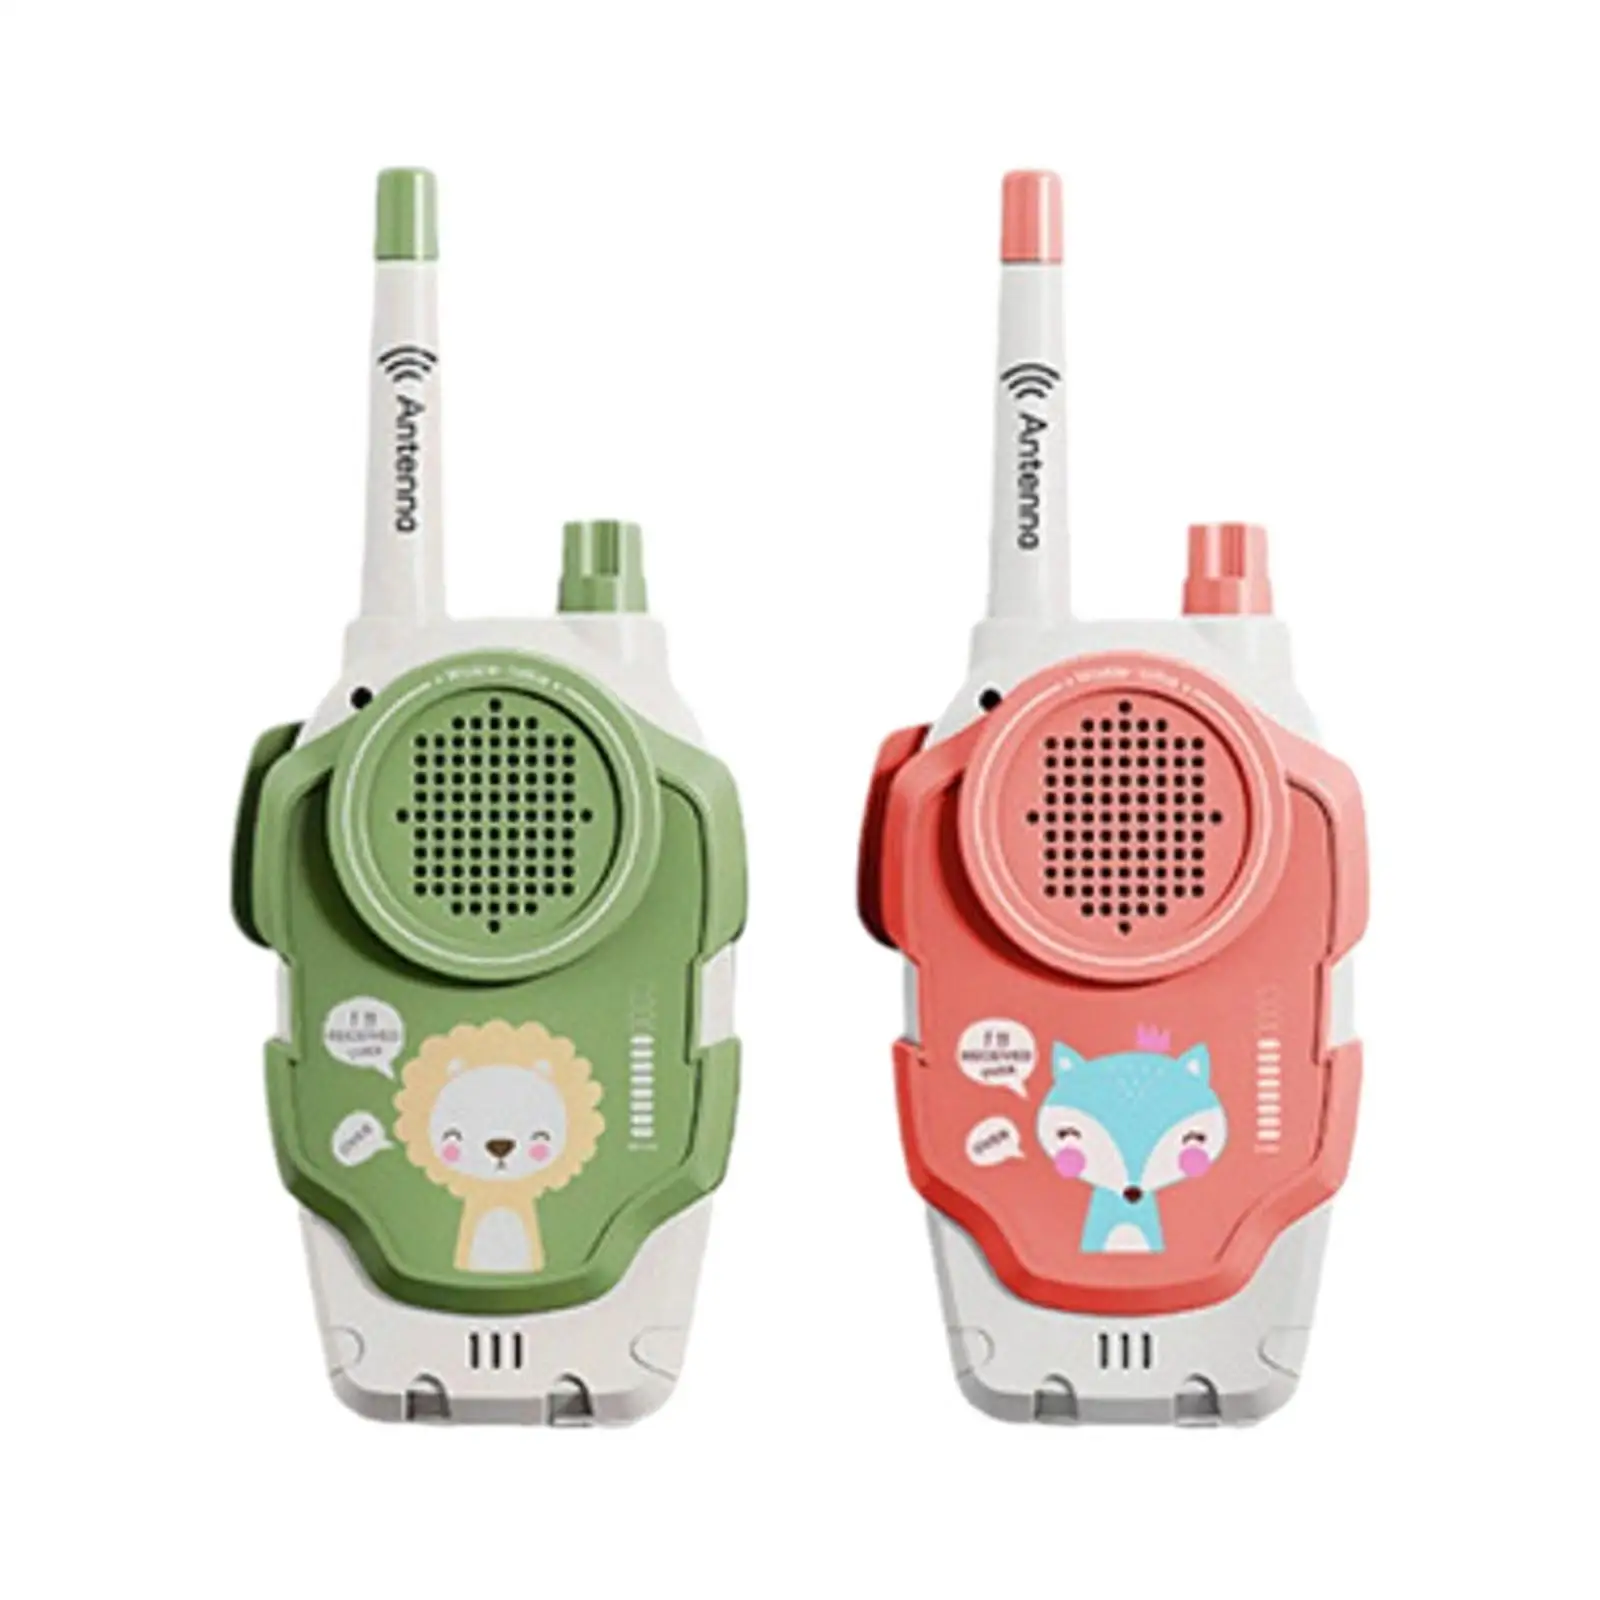 2 Pieces Children Toy Electronic Christmas Gifts Gadgets for 3 Years Old Kids Child Boys Girls Toddlers